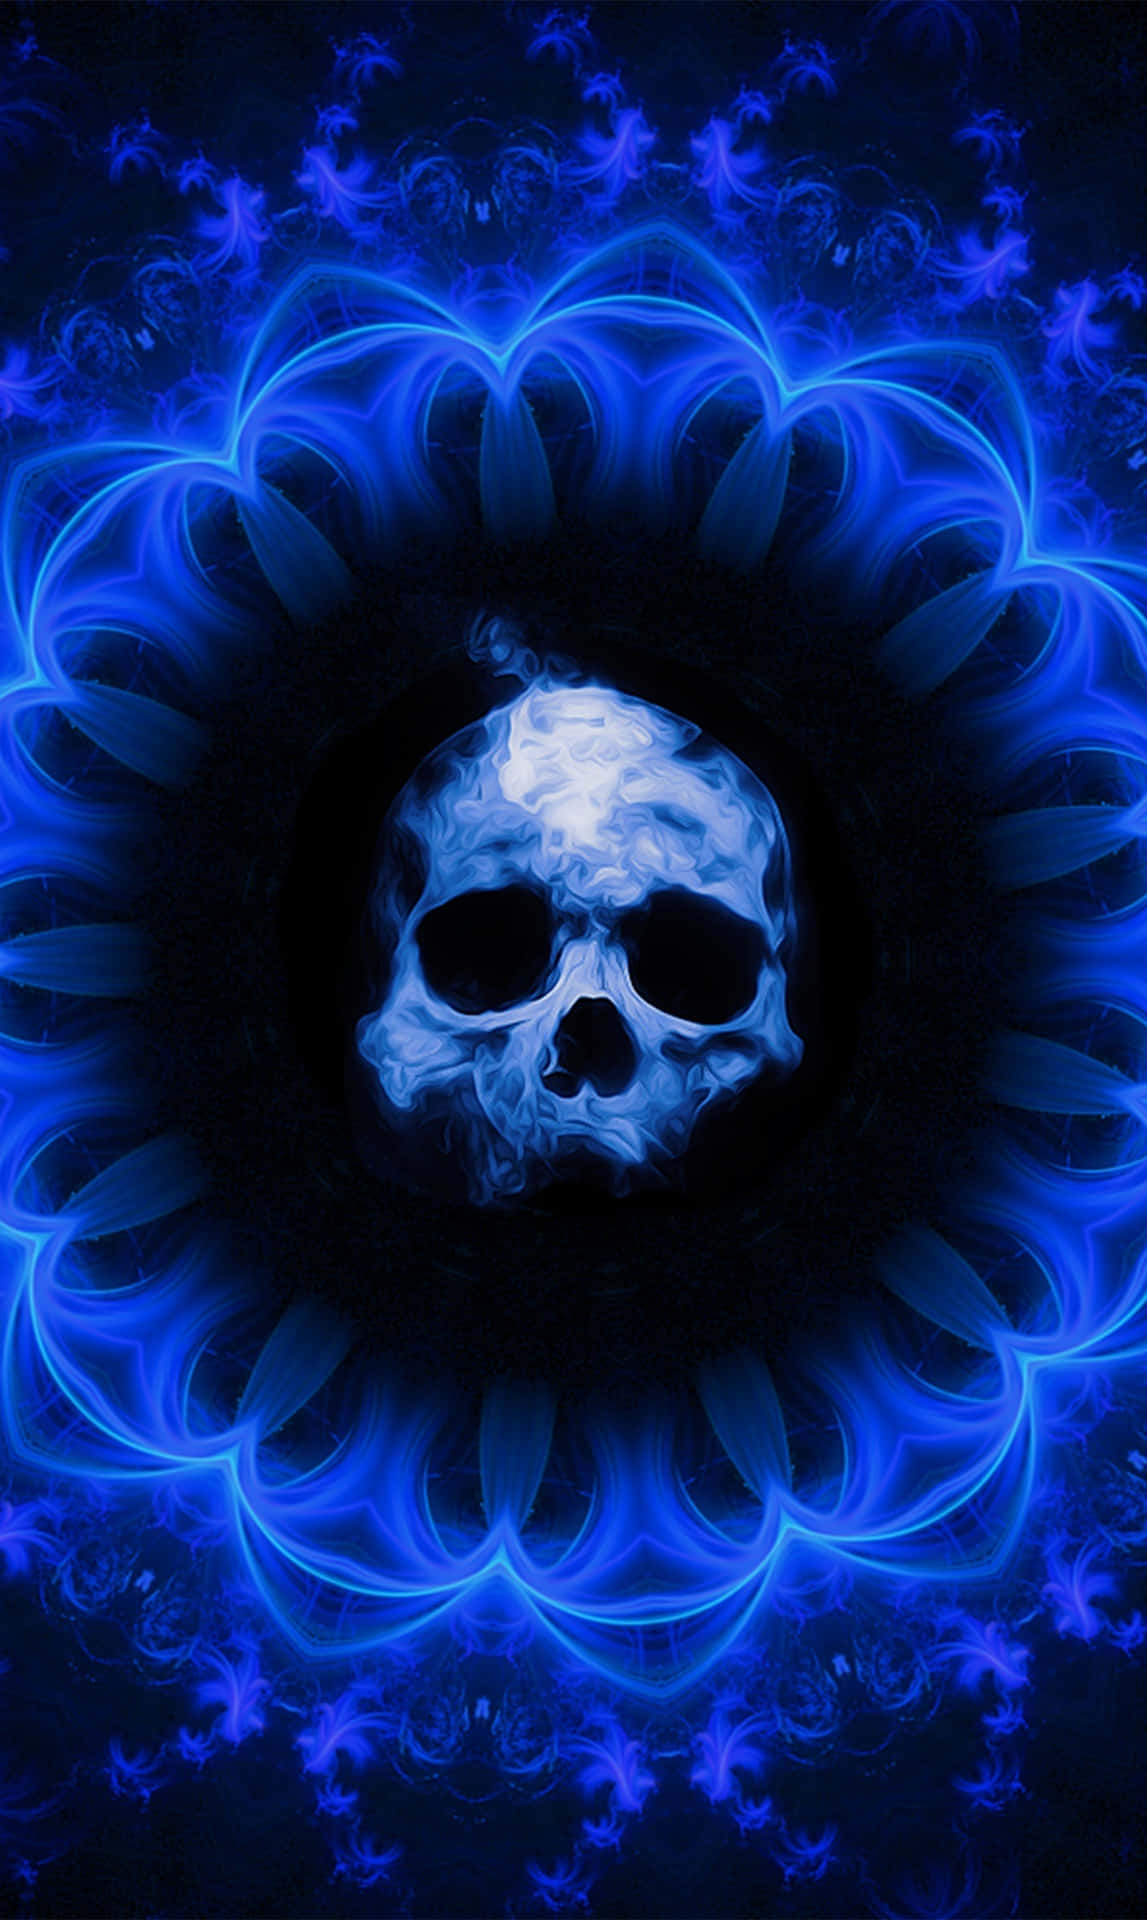 "Explore the mysteries of the universe with Galaxy Skull" Wallpaper